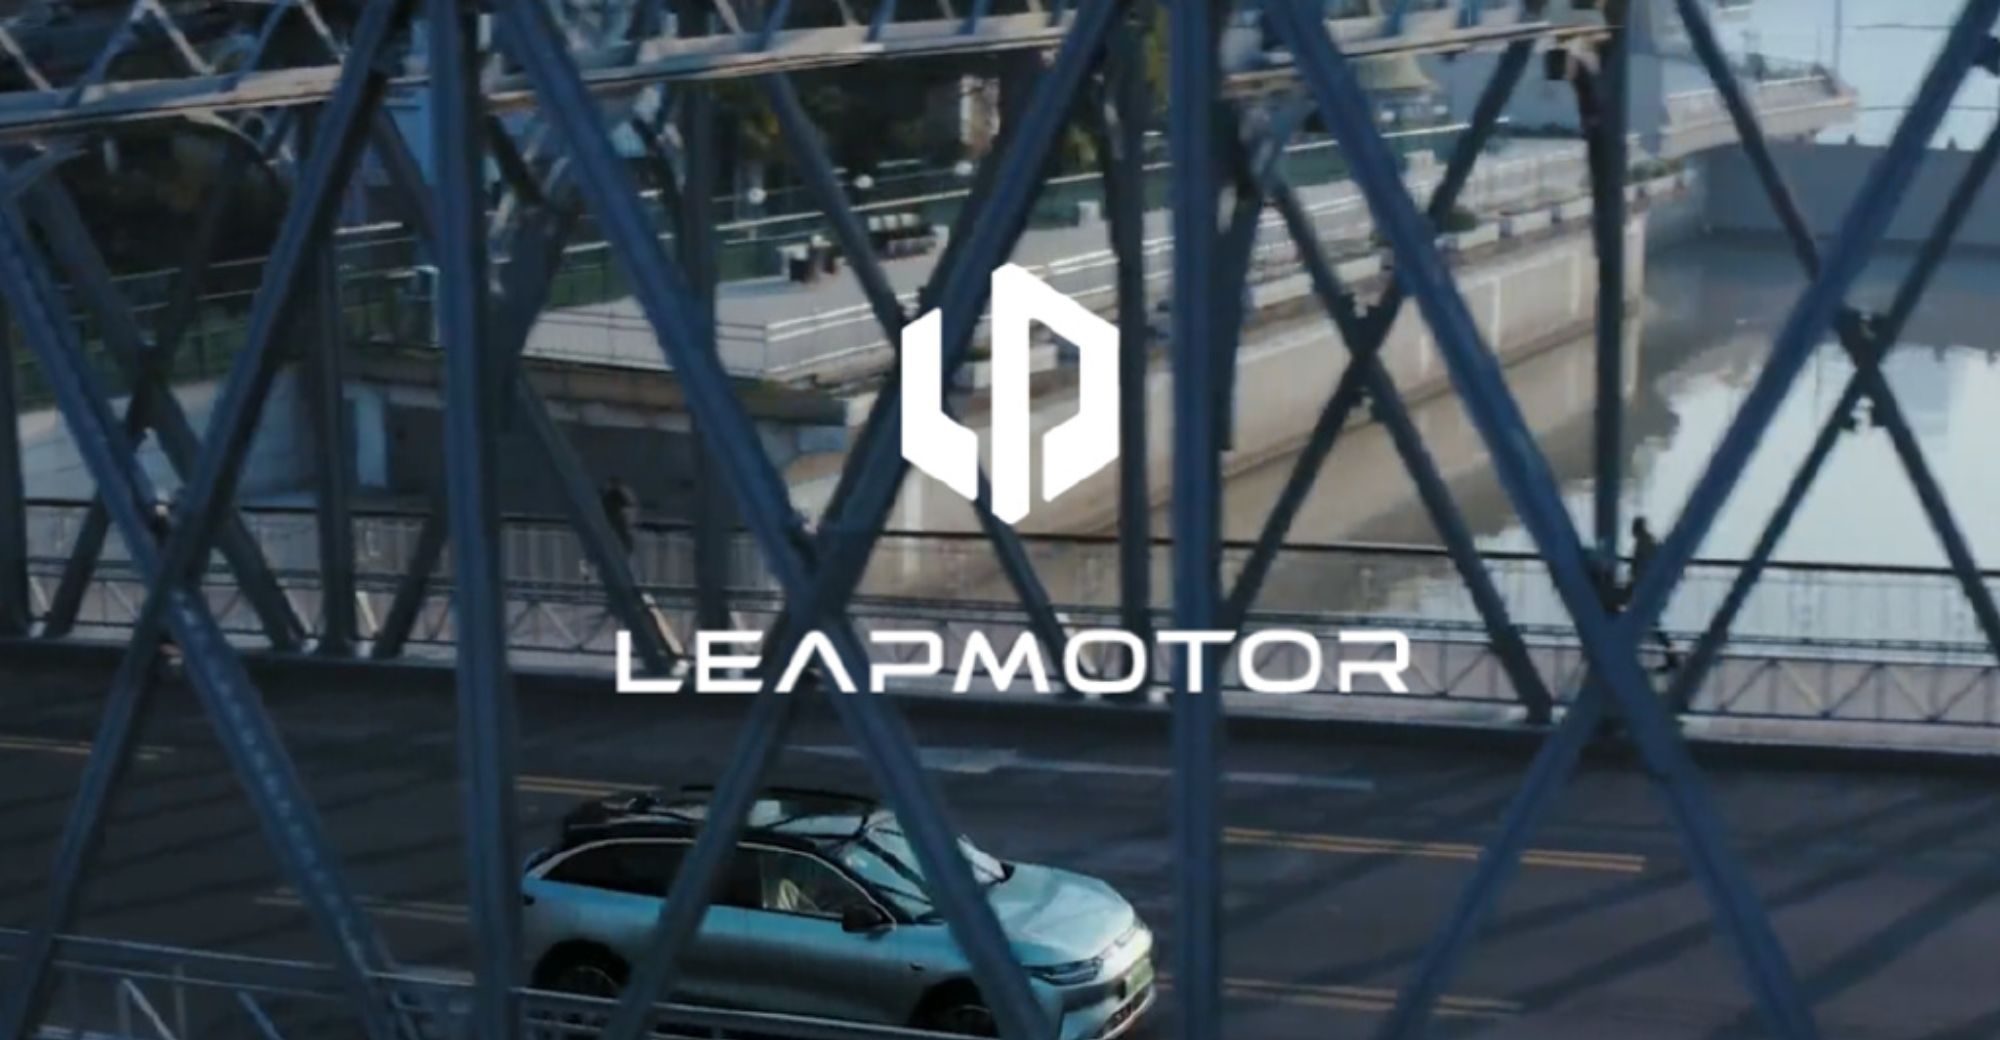 Leap Motor Secures Major Investment, Shares Surge Amid Expansion Plans